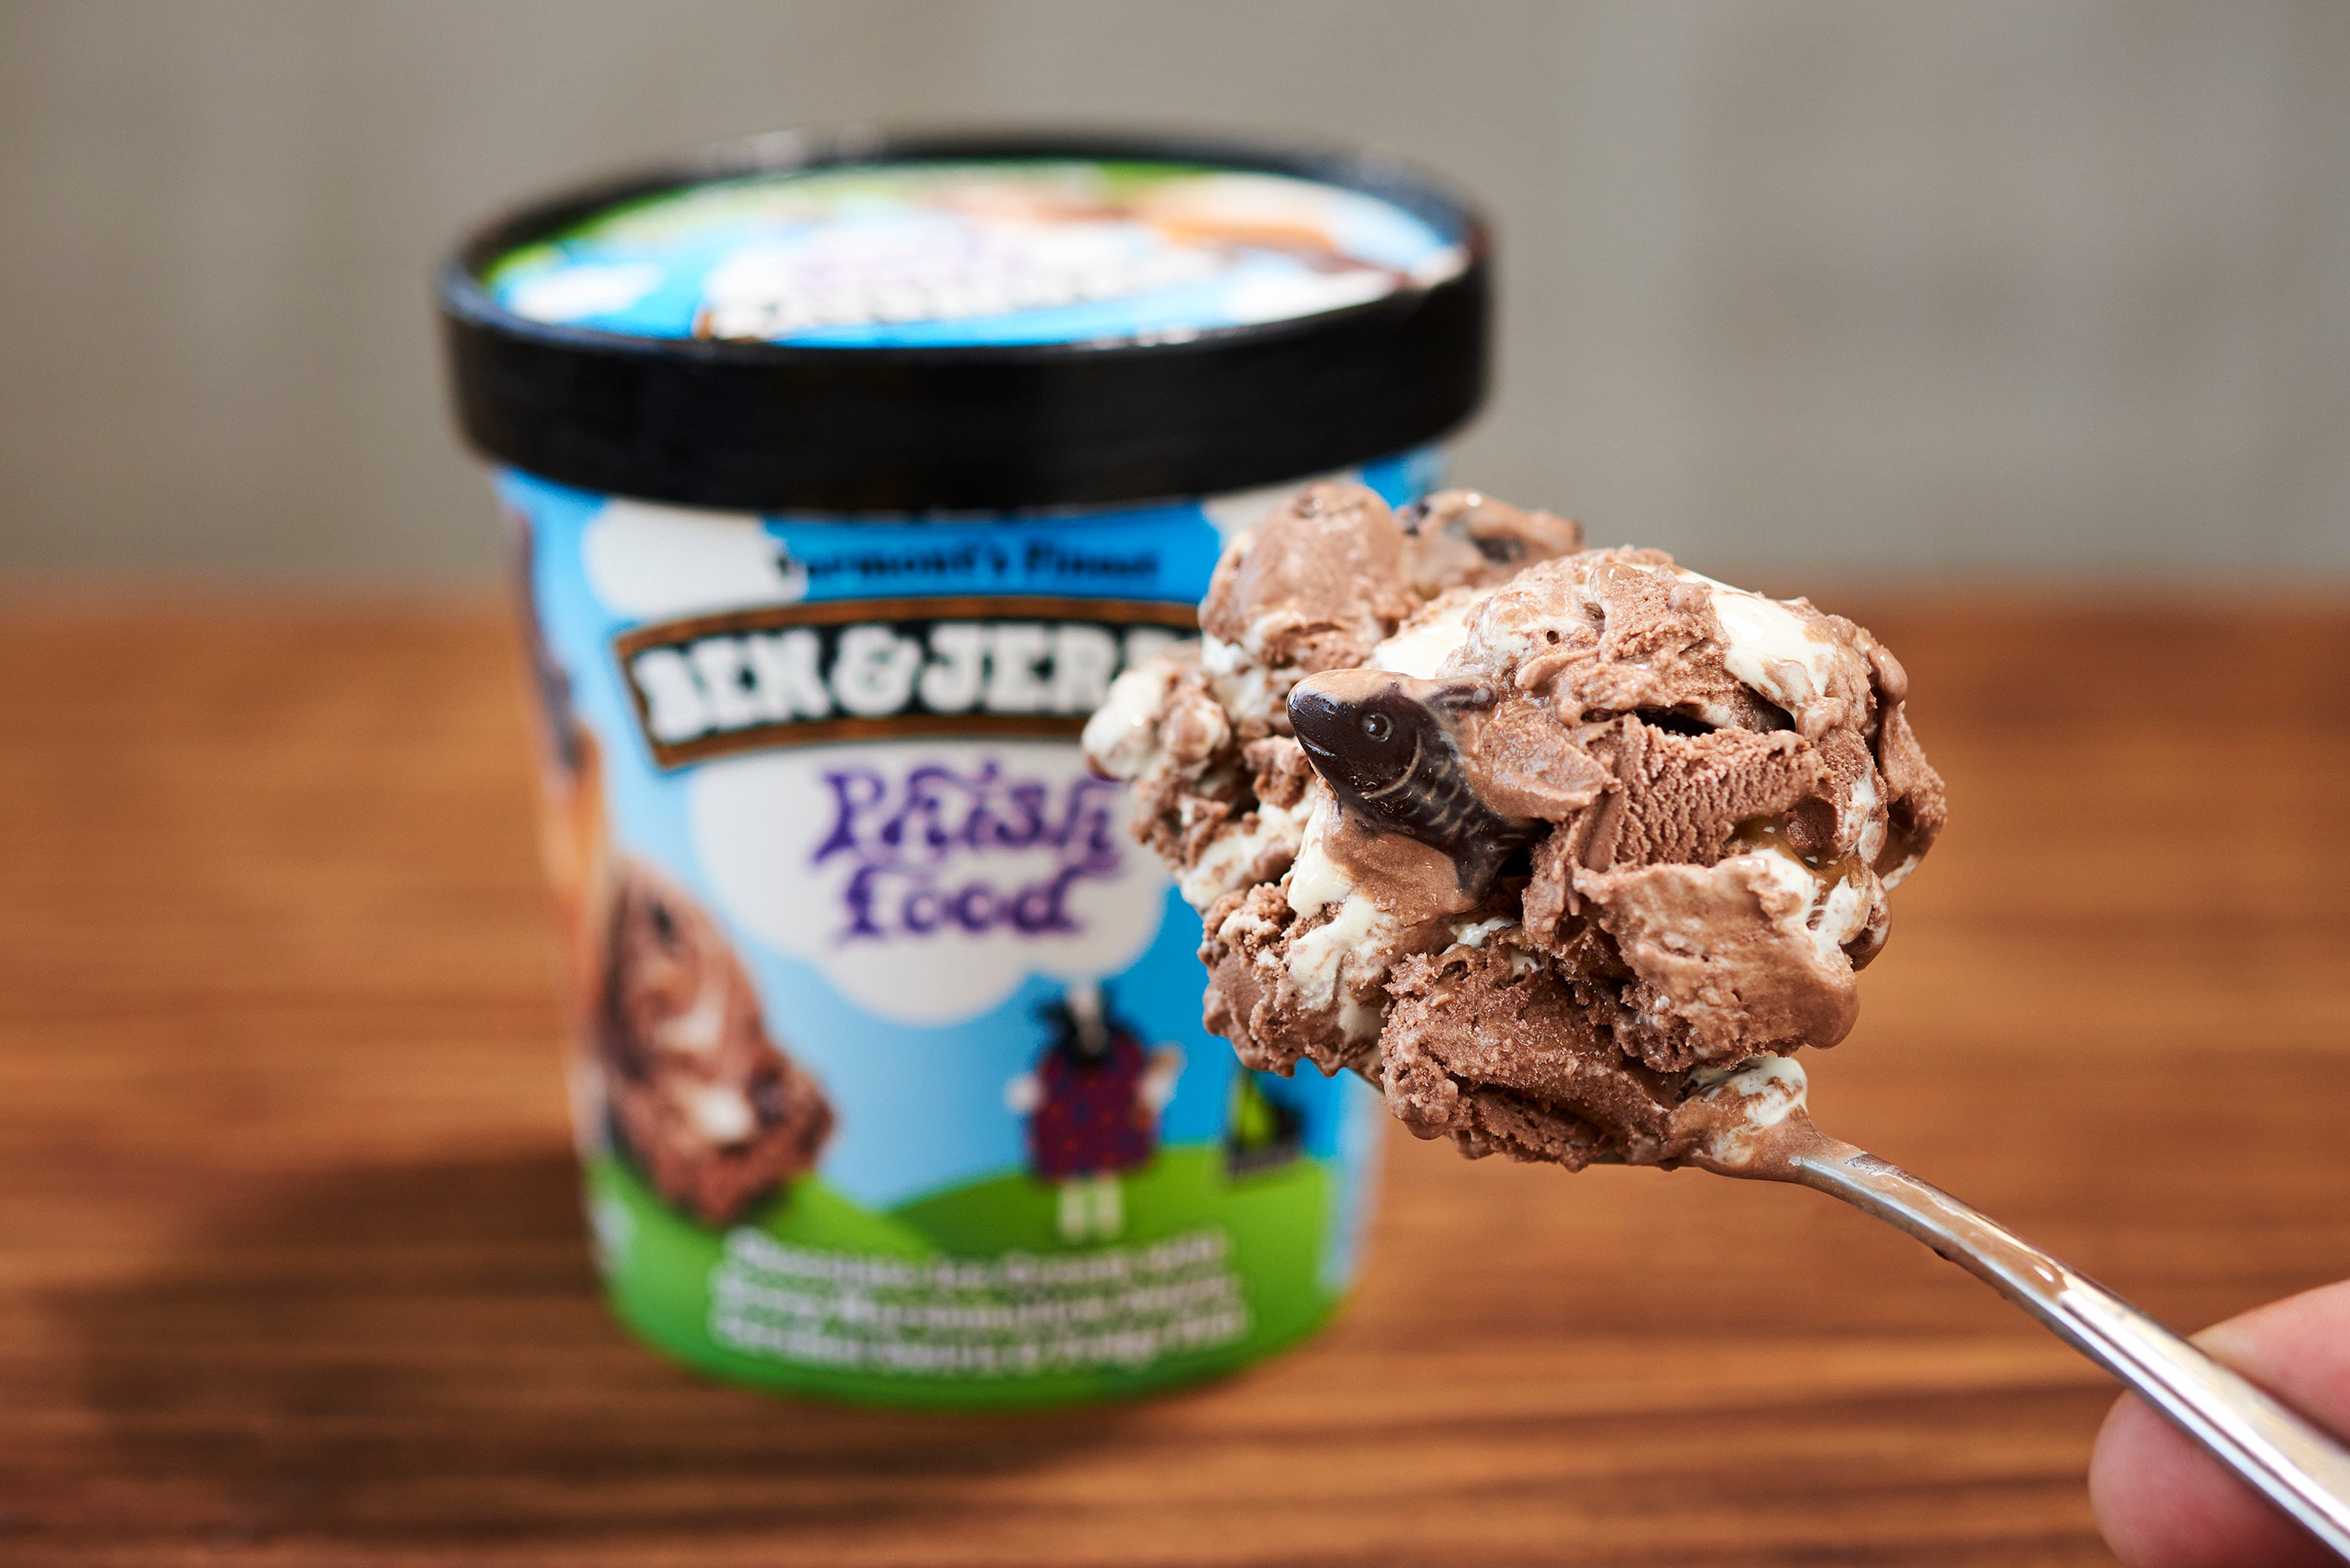 Unilever’s ice cream business accounts for around 16 per cent of global sales and up to 40 per cent of turnover in some countries